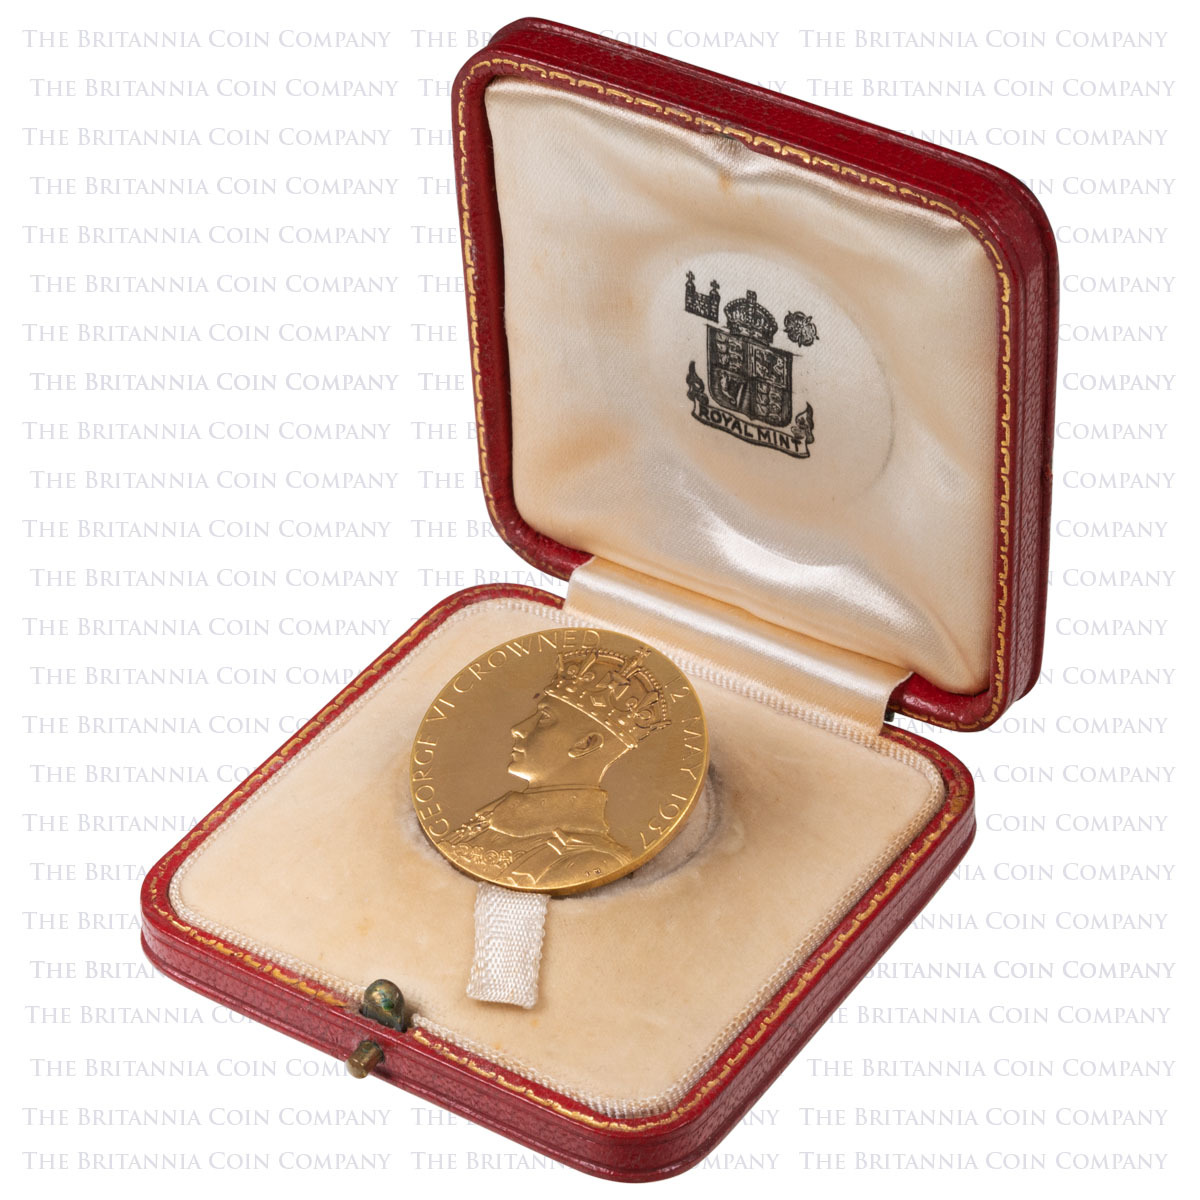 MD72 1937 King George VI Gold Royal Mint Coronation Medal In Box